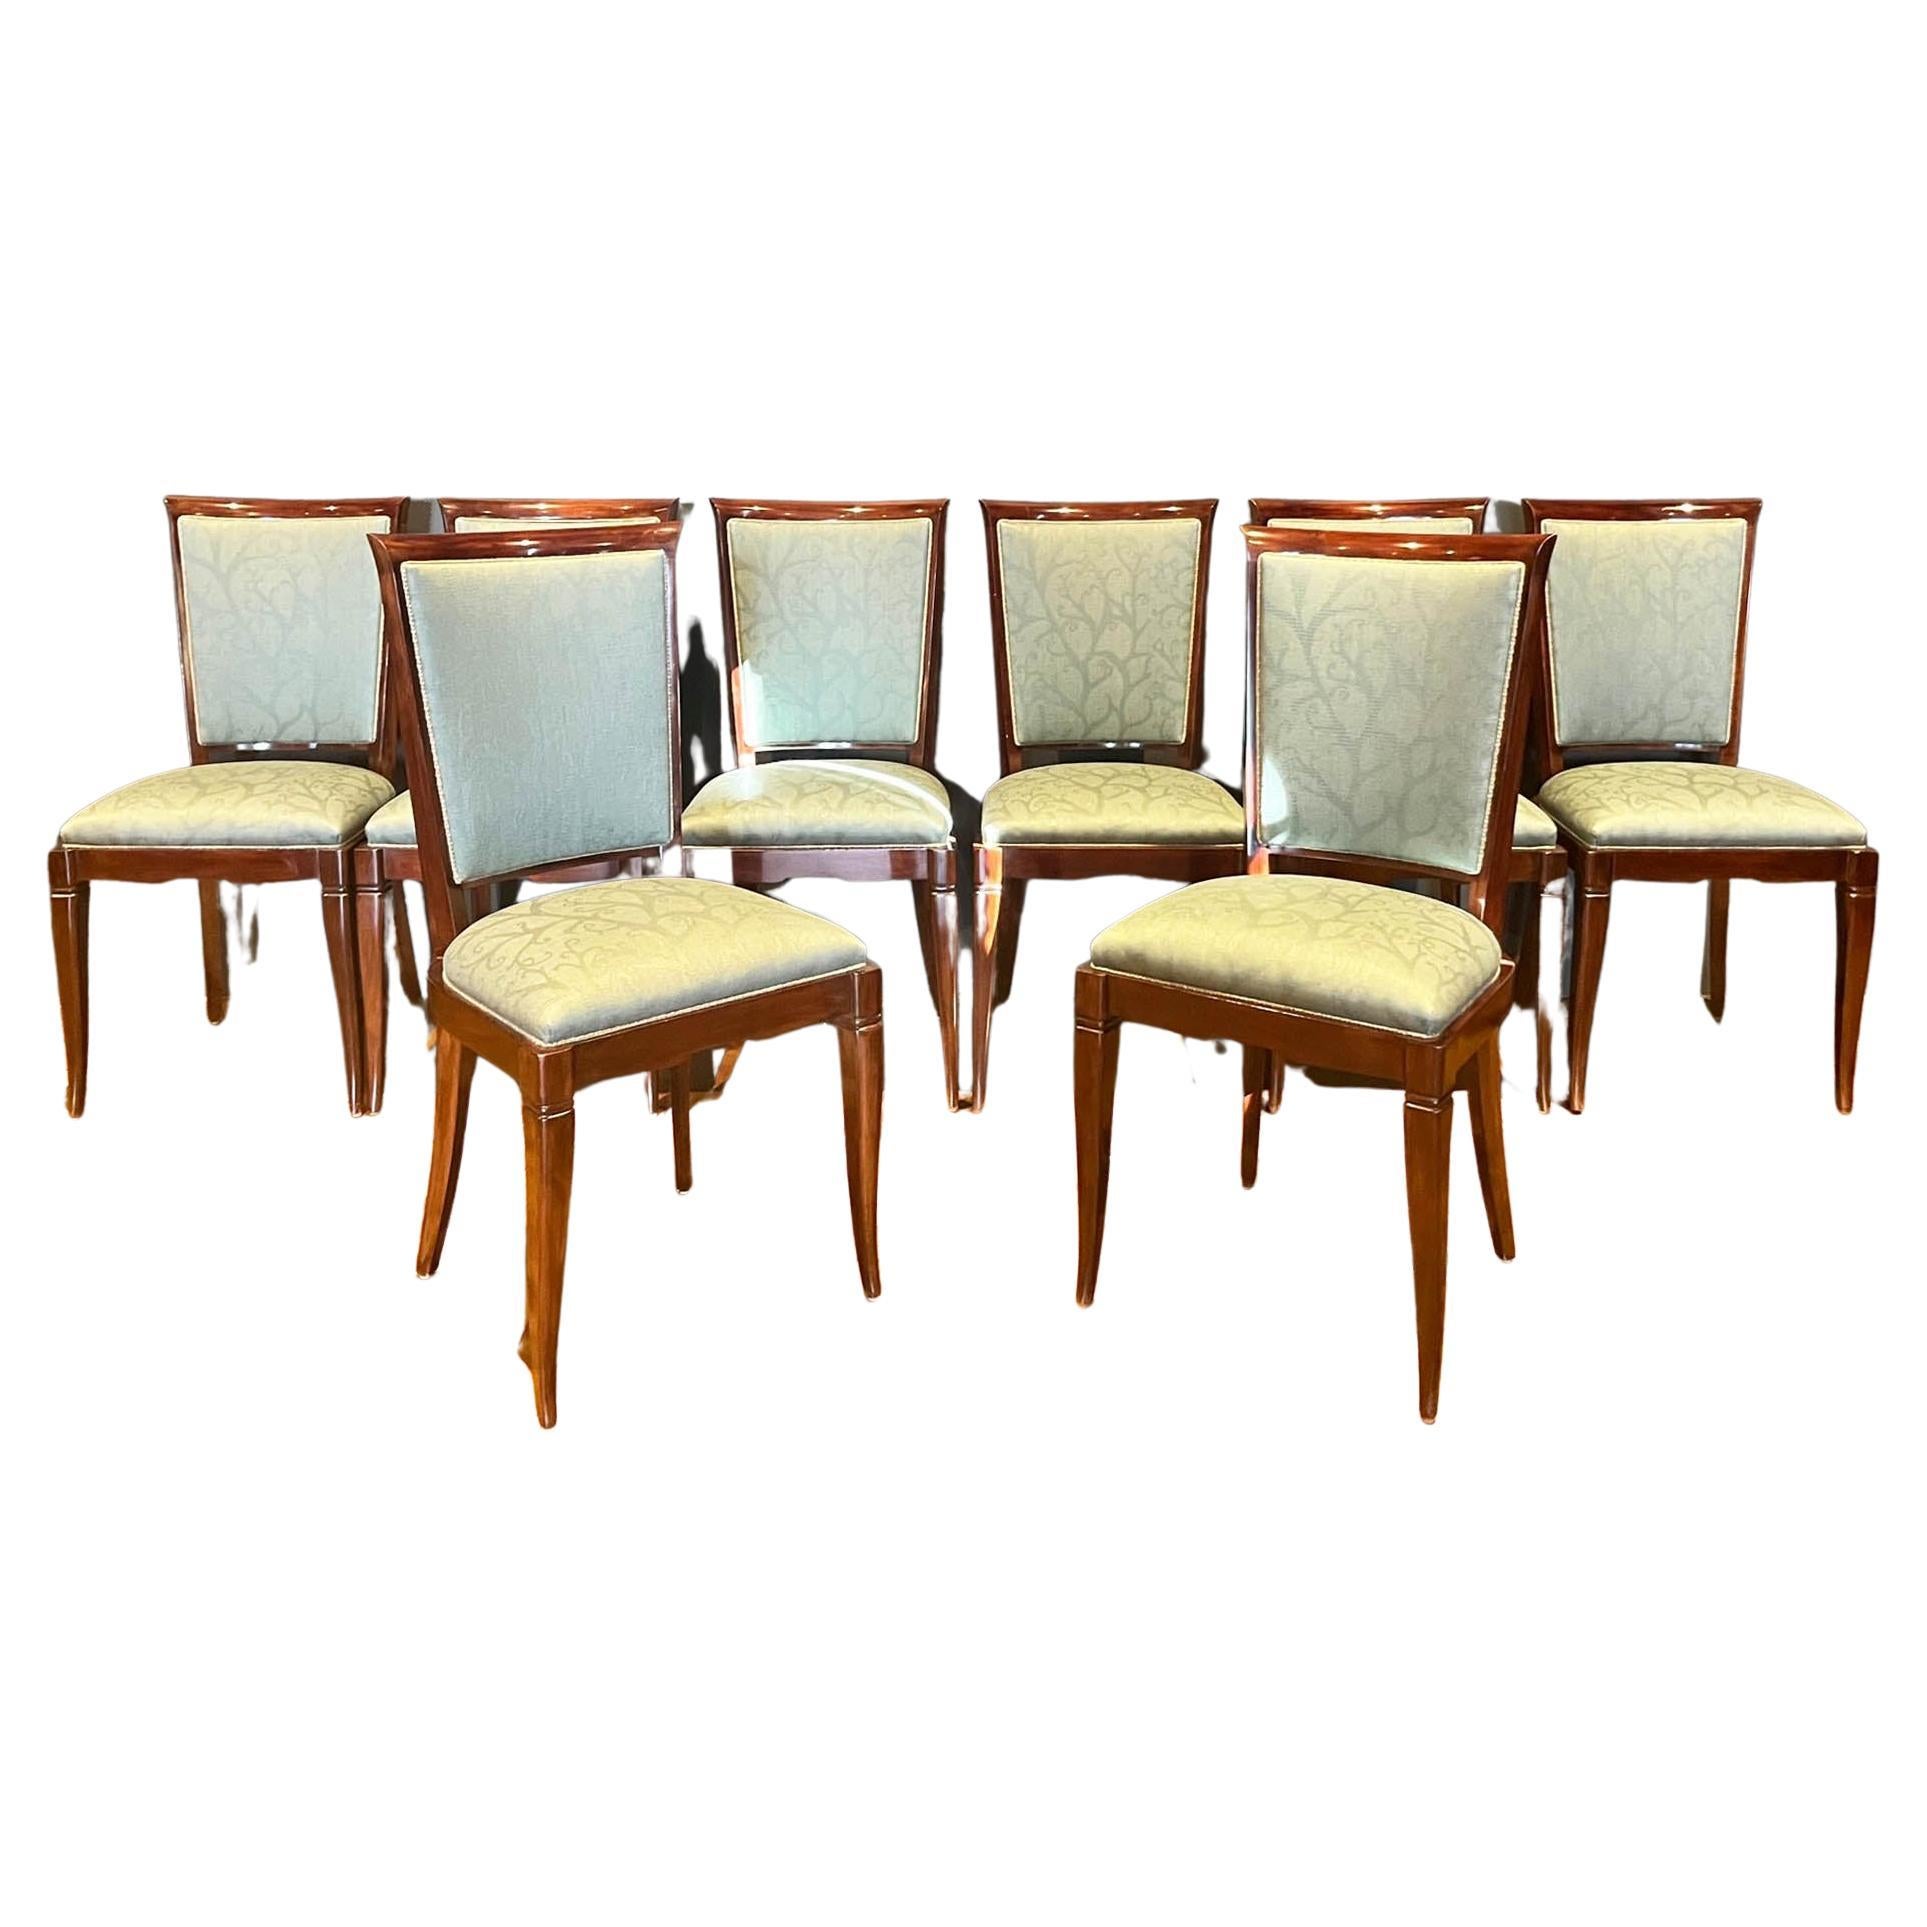 Set of 8 Vintage Art Deco Dining Room Chairs For Sale